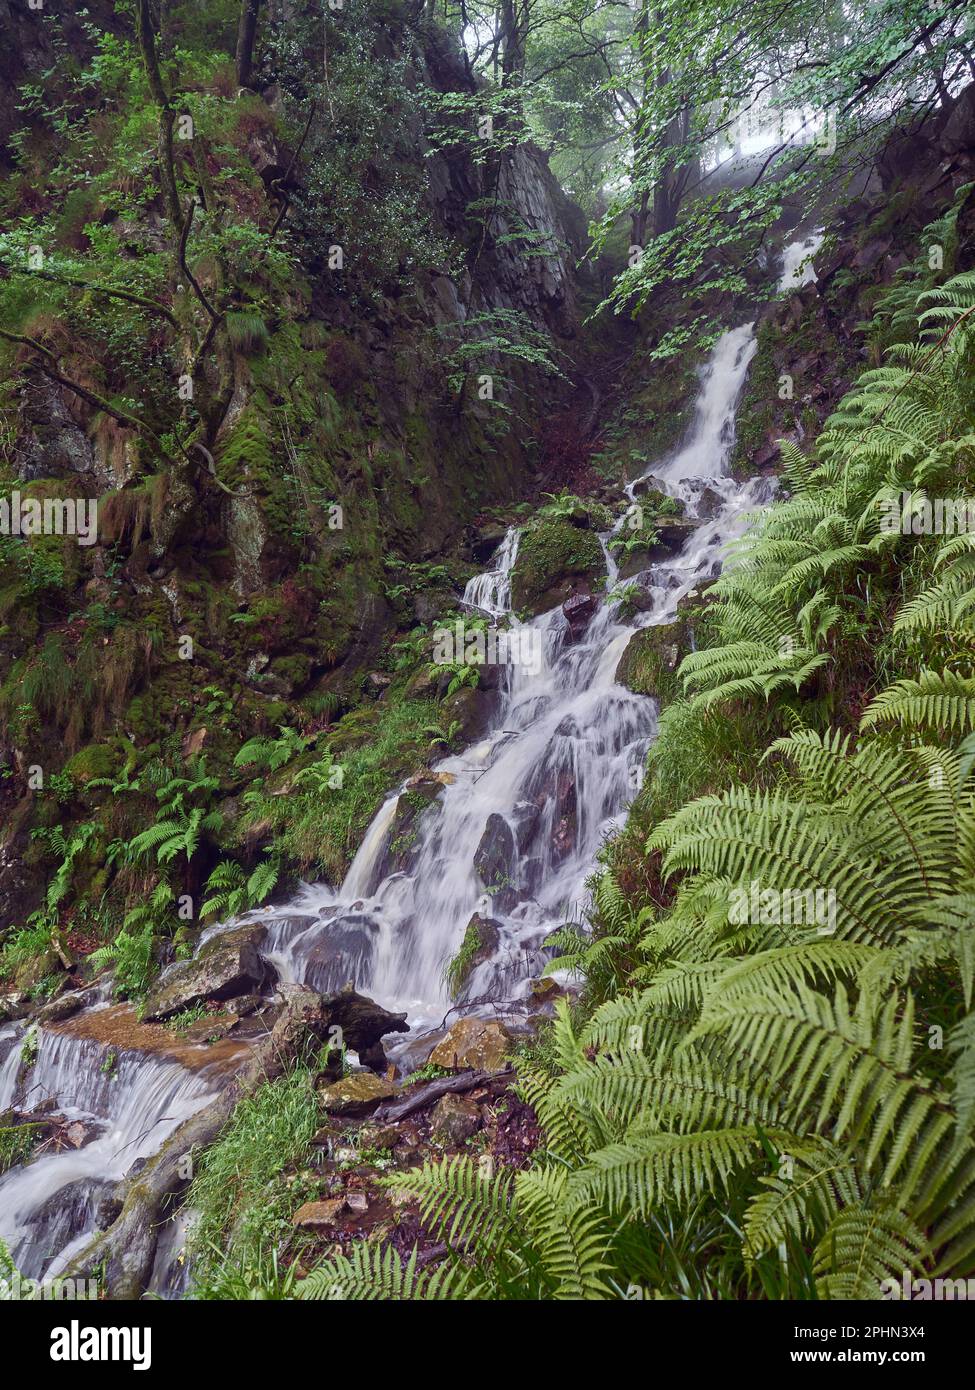 Waterfall in a rainforest Stock Photo